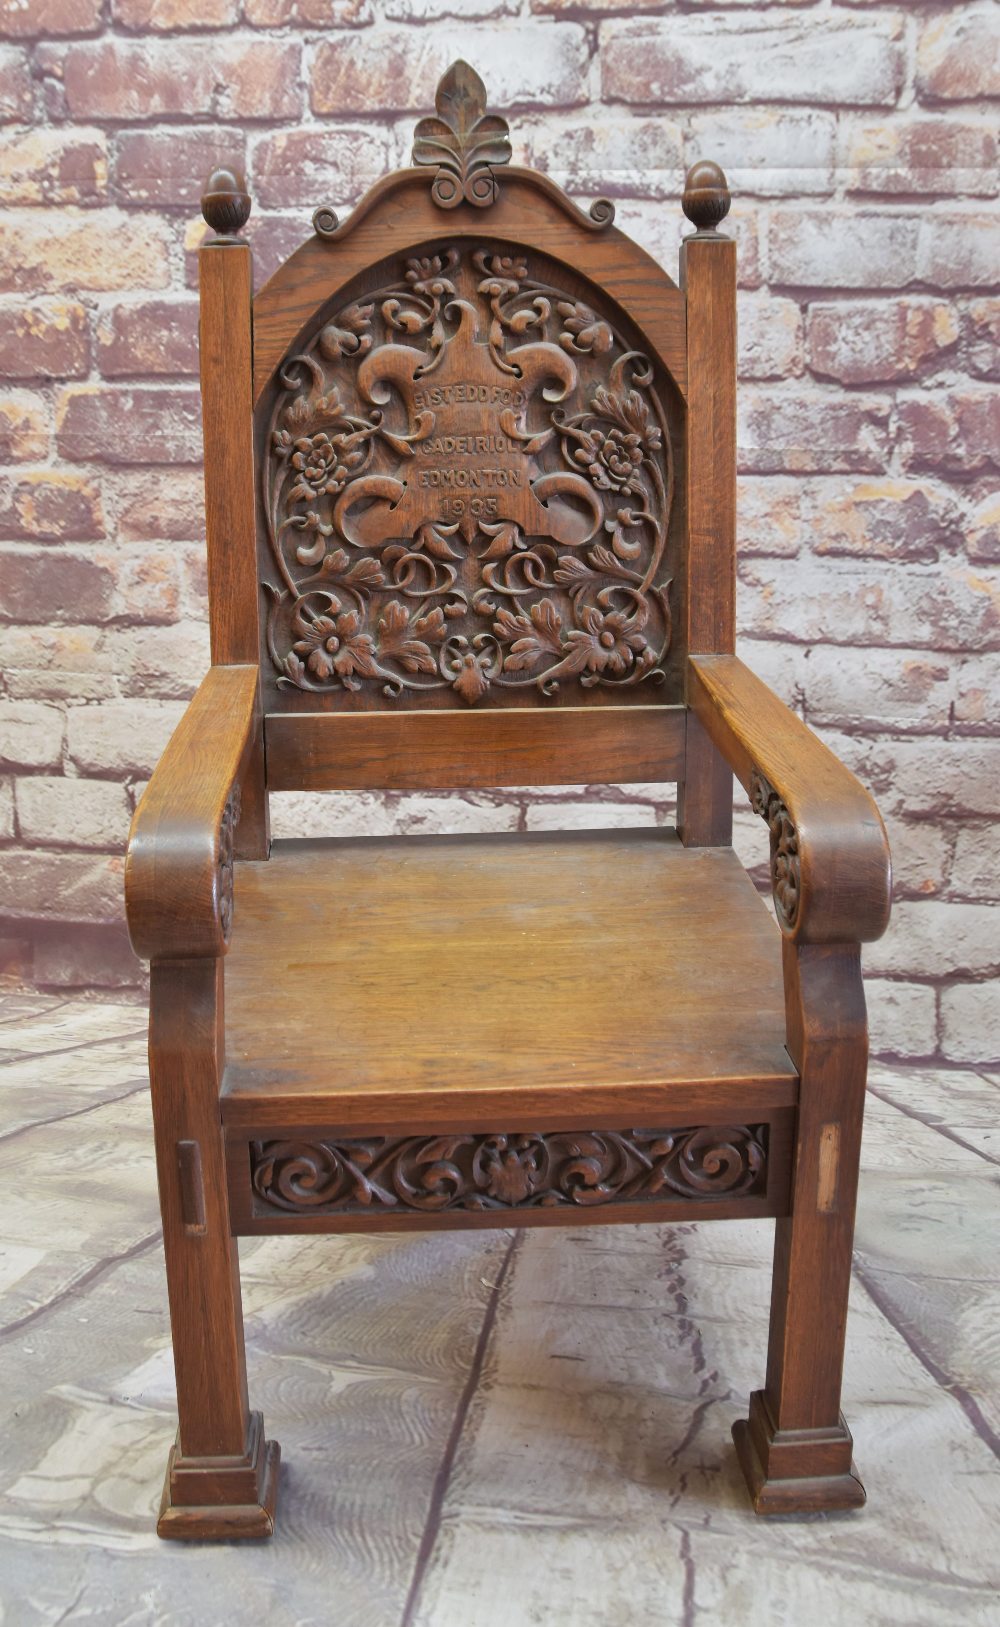 1935 EISTEDDFOD CHAIR FOR EDMONTON (NORTH LONDON) oak, carved inscription within cartouche and - Image 3 of 5